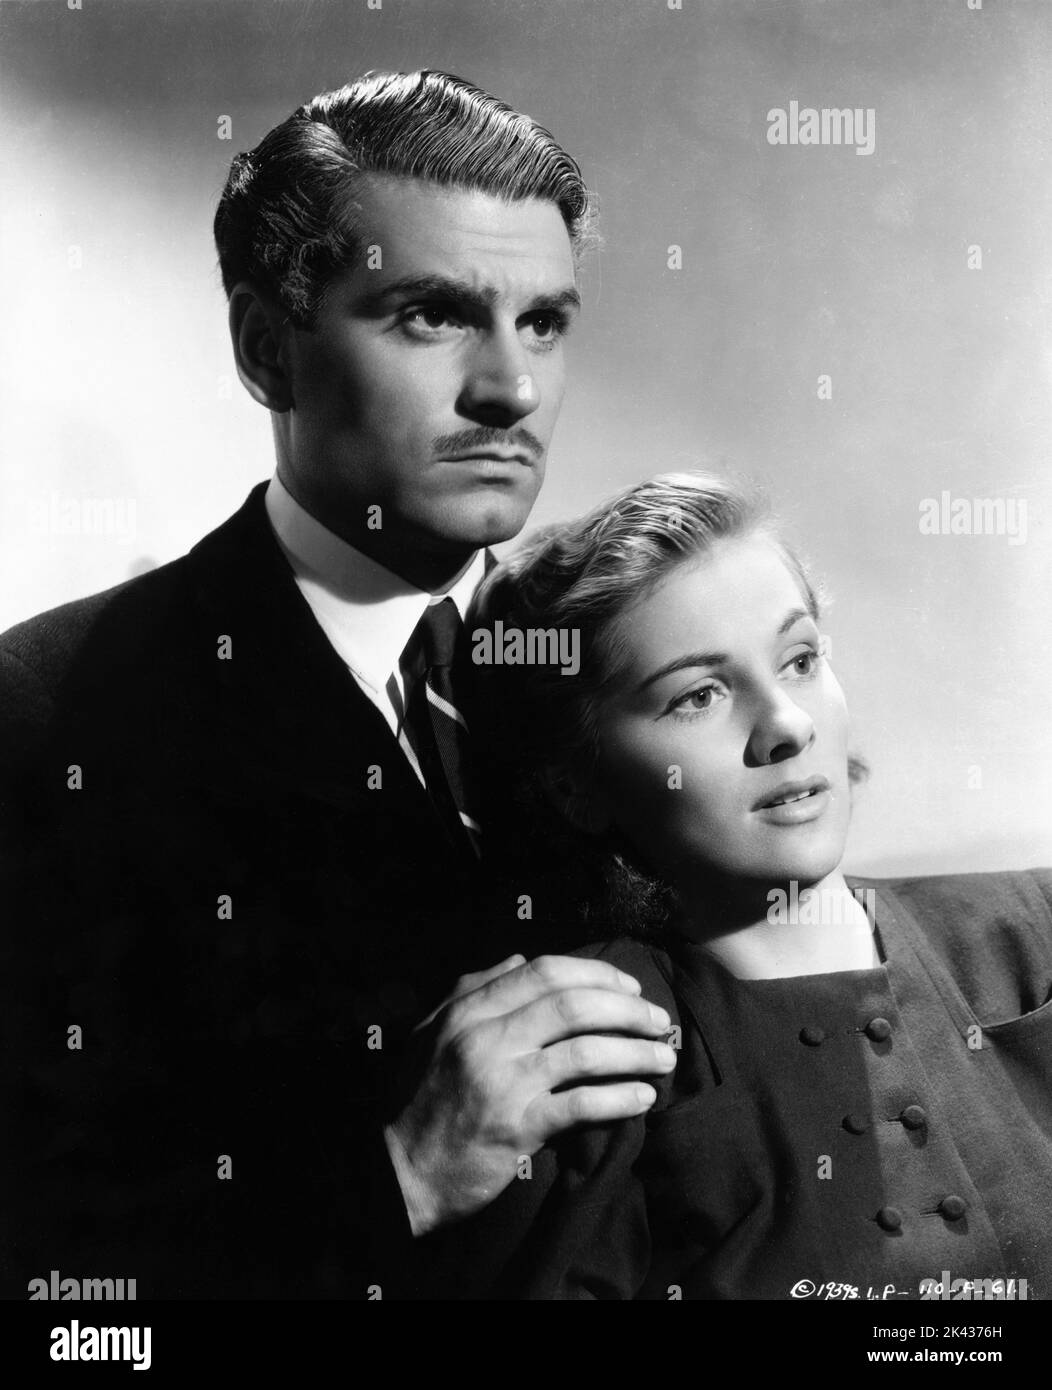 LAURENCE OLIVIER and JOAN FONTAINE Publicity Portrait in REBECCA 1940 director ALFRED HITCHCOCK novel Daphne Du Maurier producer David O. Selznick Selznick International Pictures / United Artists Stock Photo